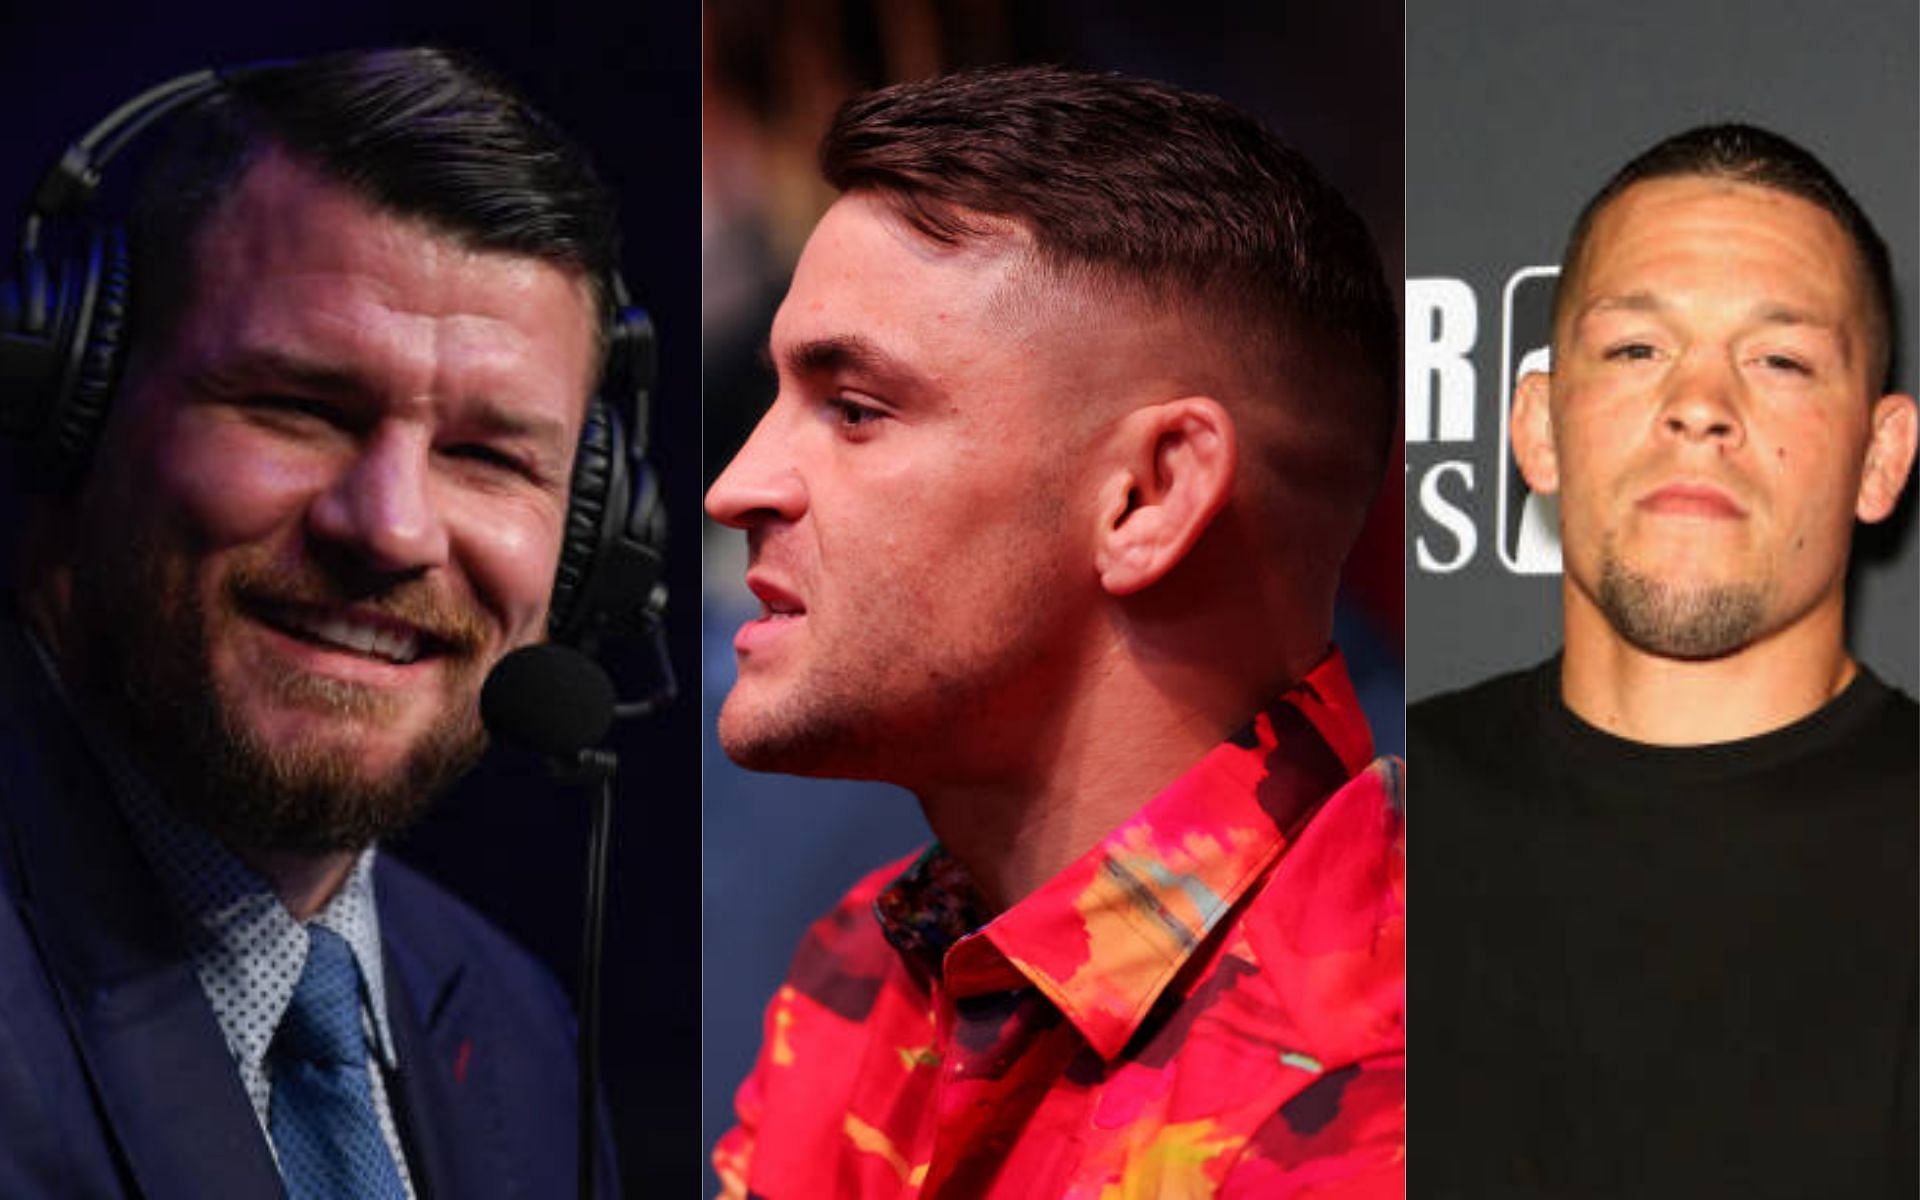 From left to right: Michael Bisping, Dustin Poirier, and Nate Diaz